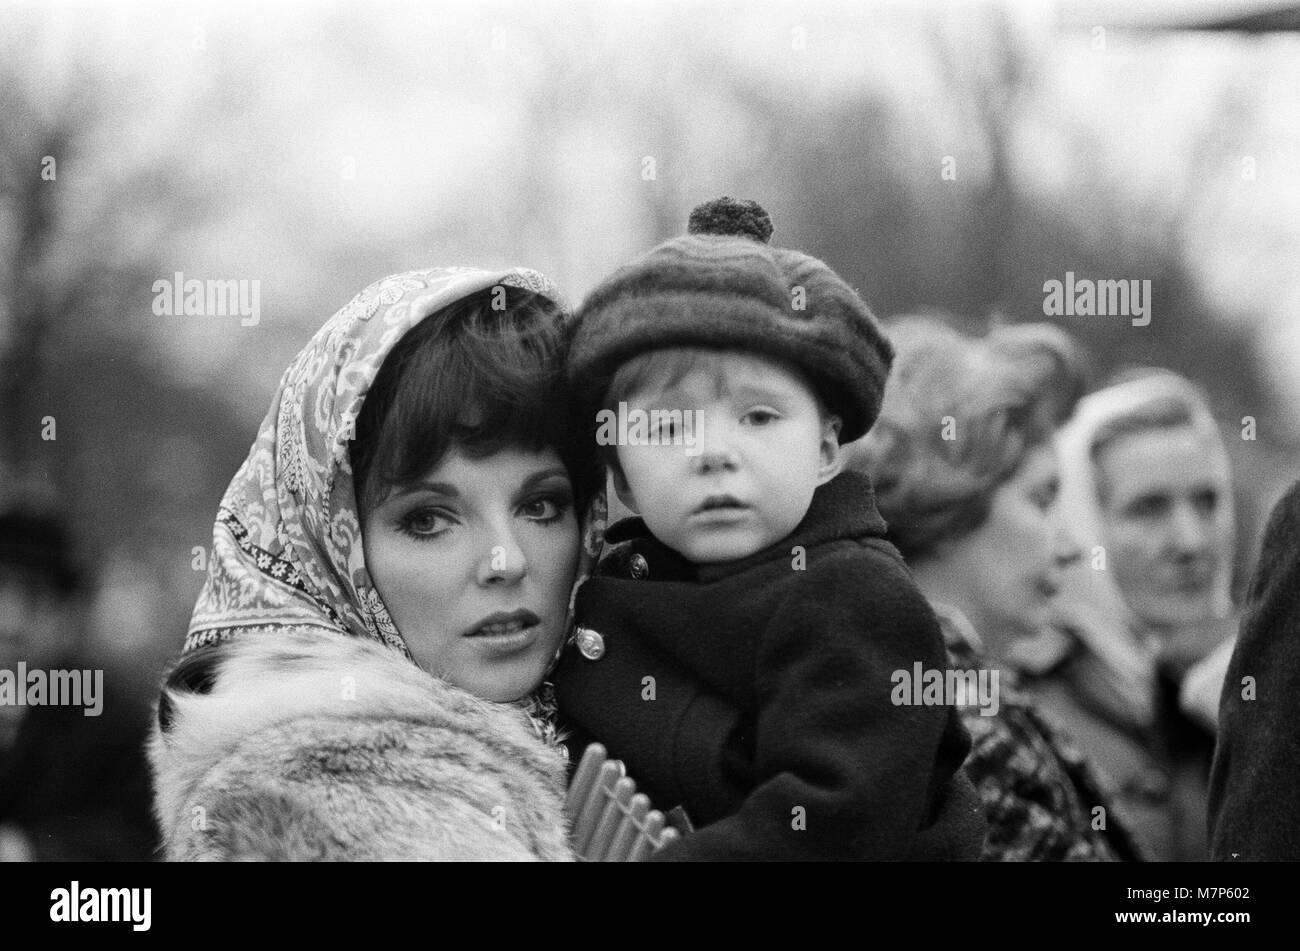 Joan Collins on the set of her new film 'Subterfuge' in Regents Park with her daughter Tara Newley. Filming was stopped for the day when one of the cameras was damaged after falling over. 16th January 1968. Stock Photo